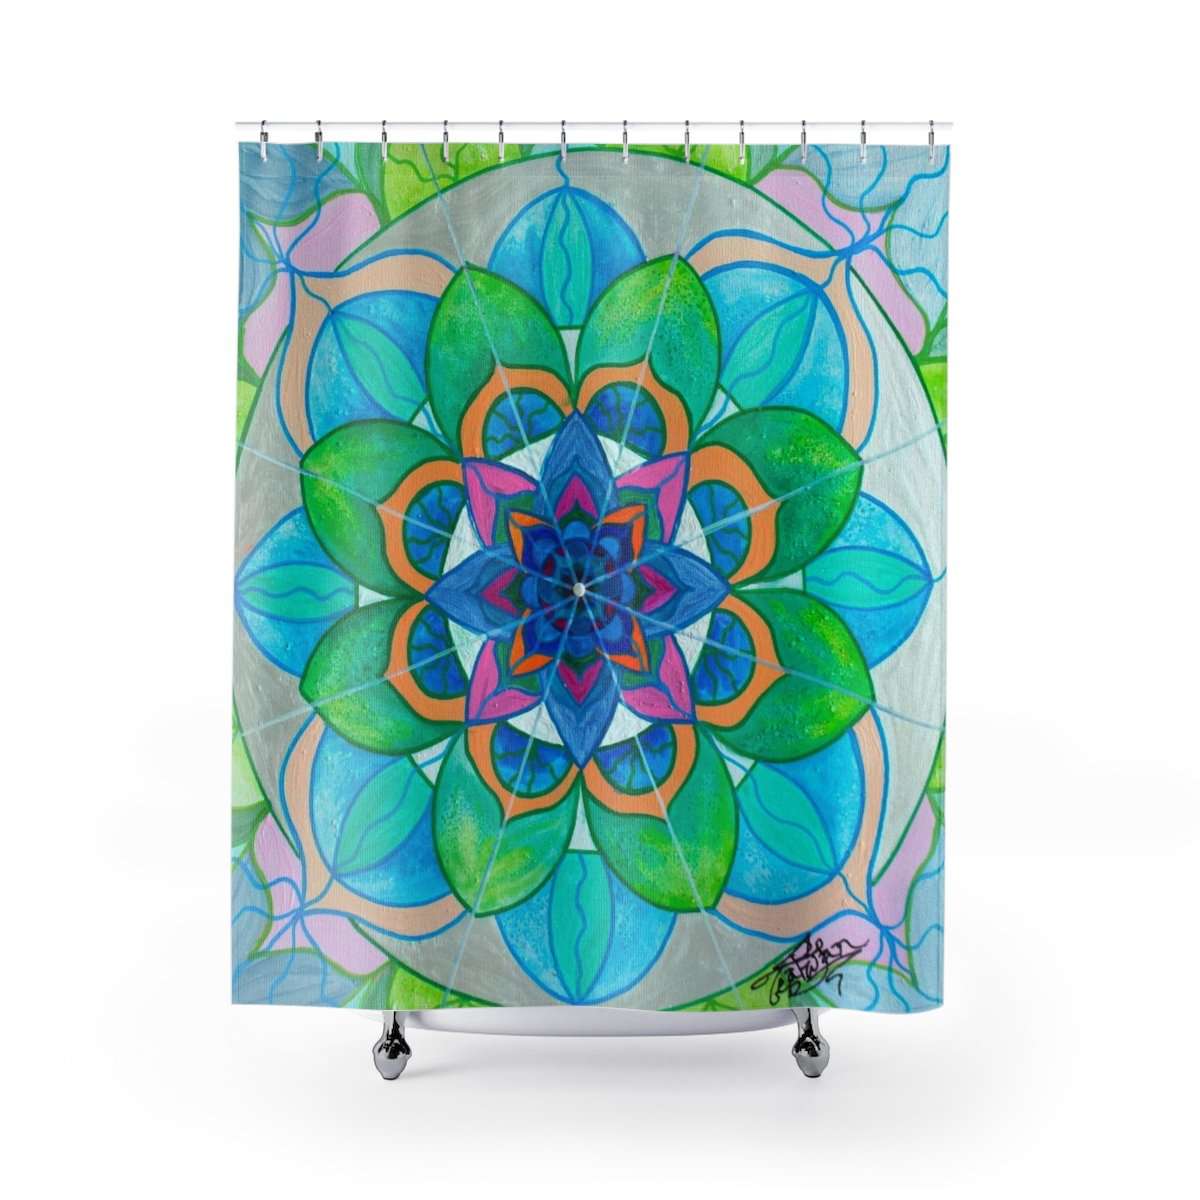 big-savings-on-quality-openness-shower-curtains-hot-on-sale_0.jpg